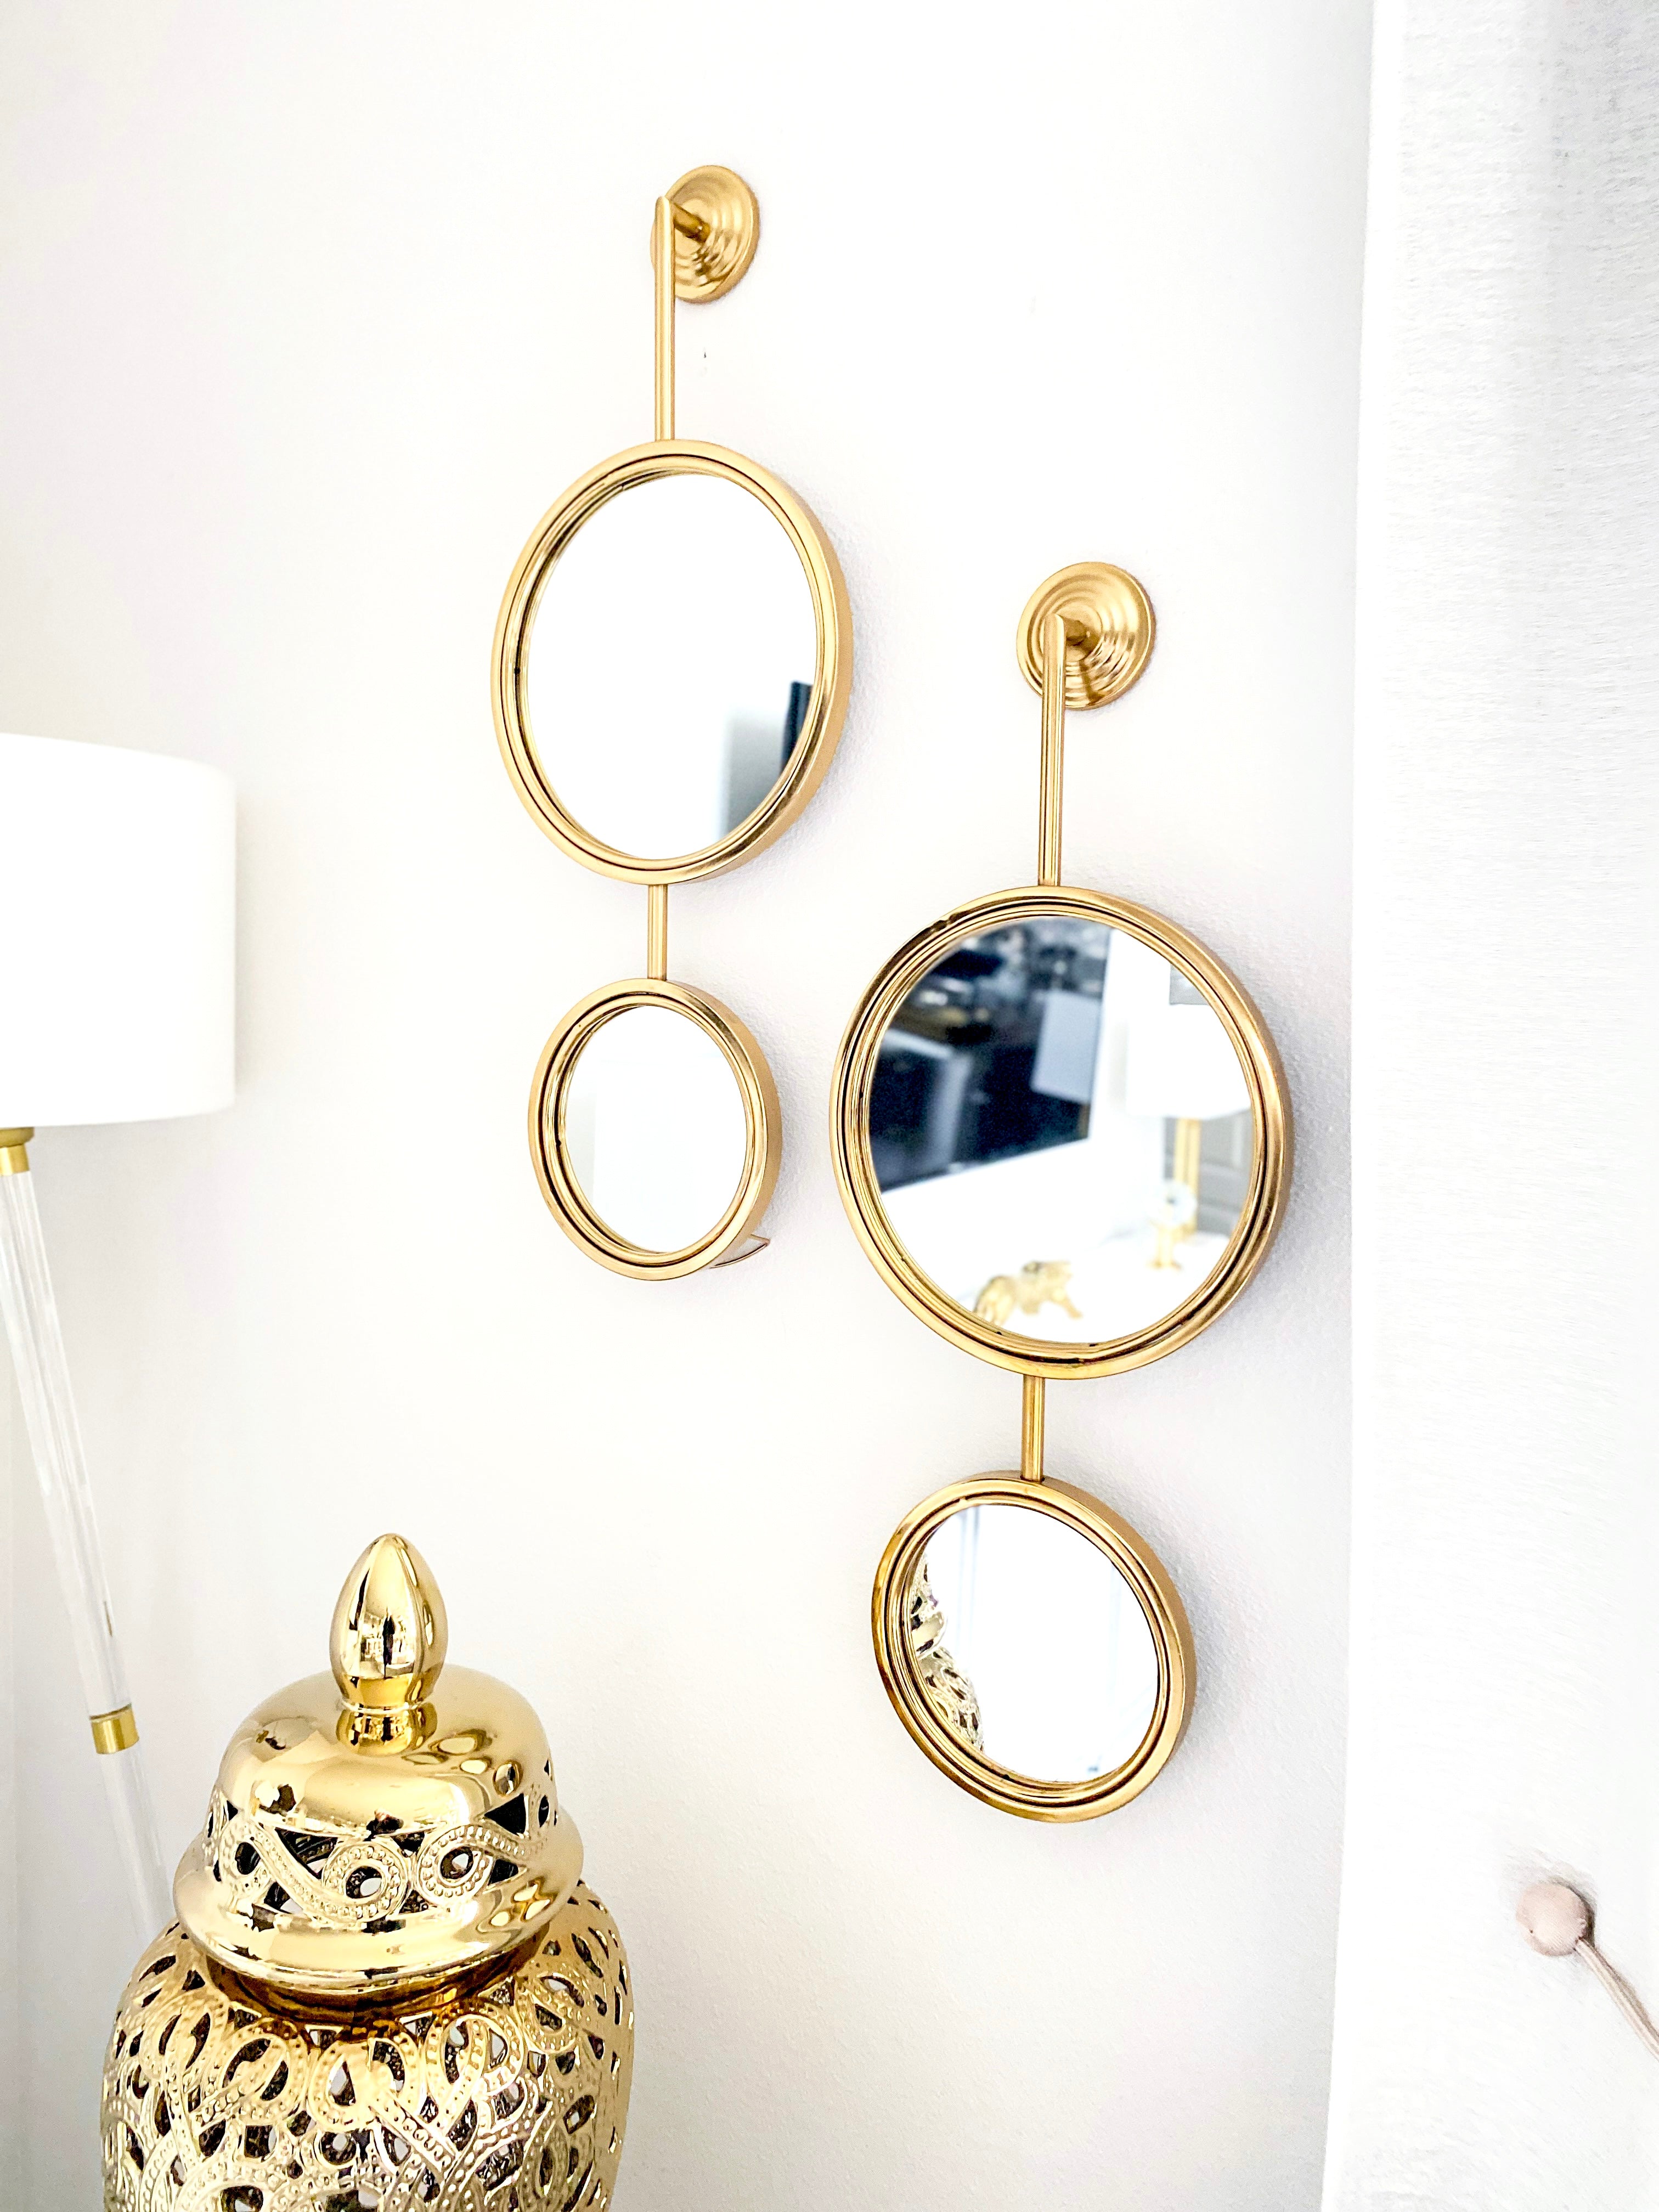 Gold Round Decorative Wall Mirrors Set of 2 - HTS HOME DECOR